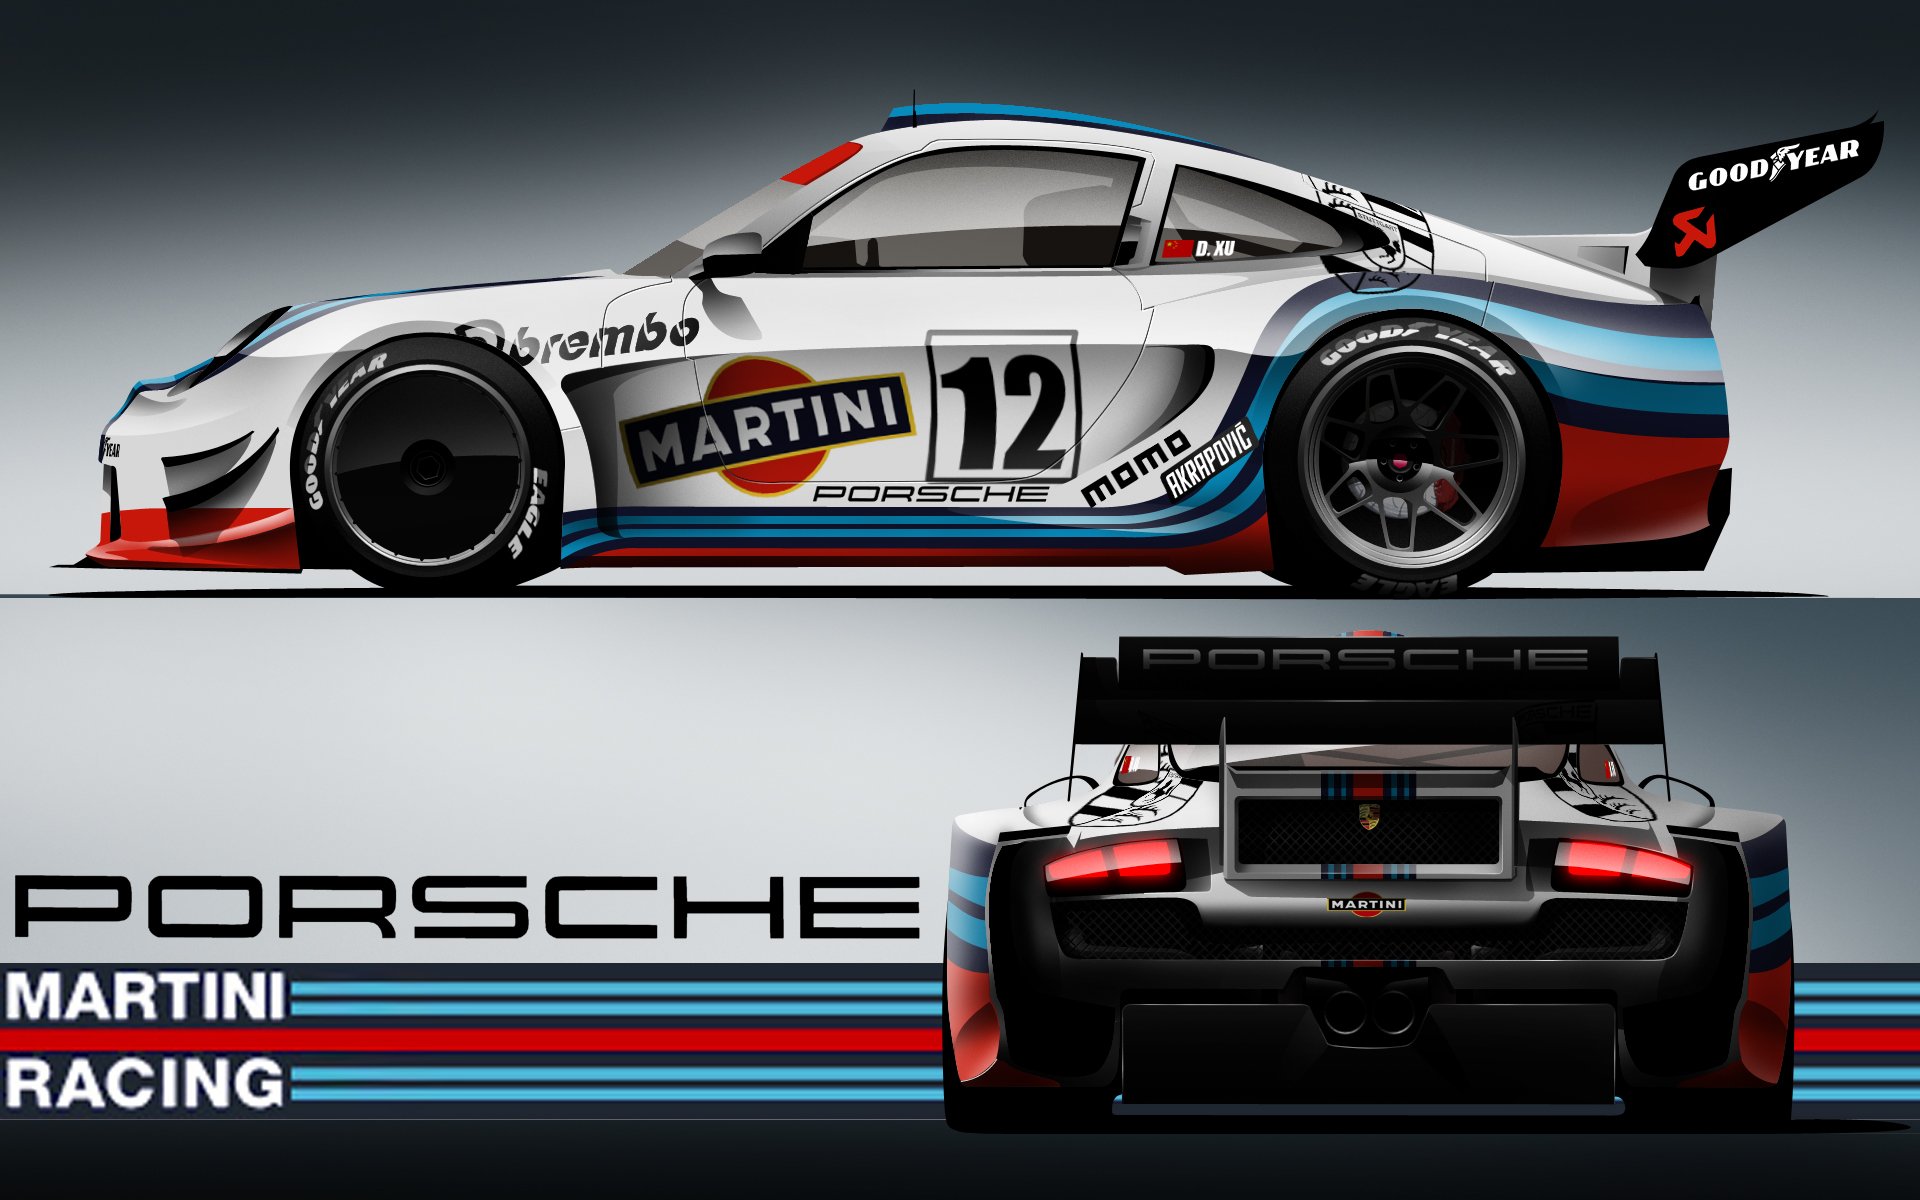 Martini Racing Porsche Wallpapers Hd Desktop And Mobile Backgrounds